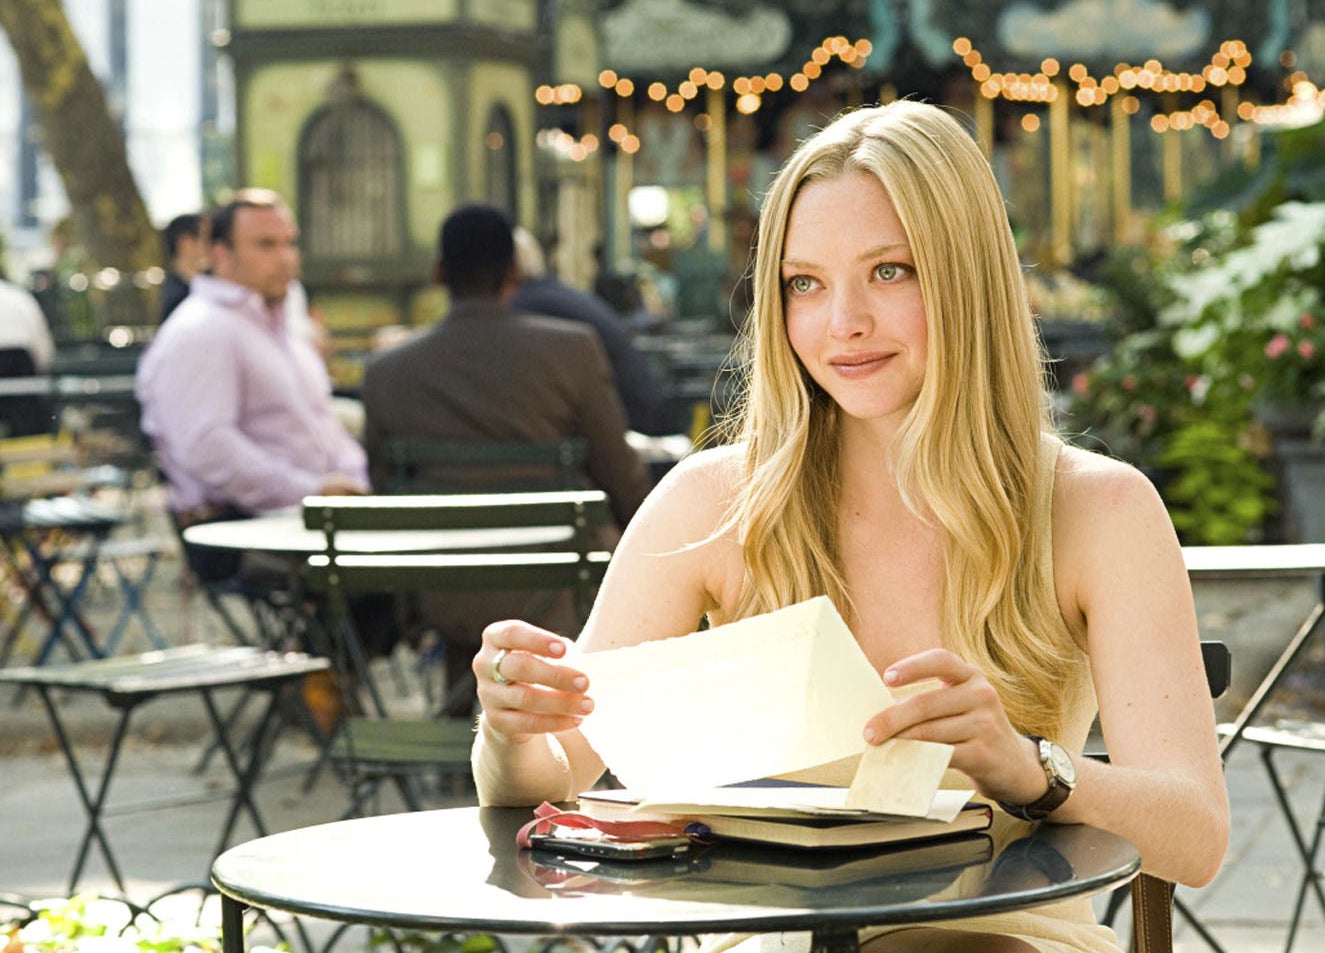 her character sitting at a cafe table with a letter